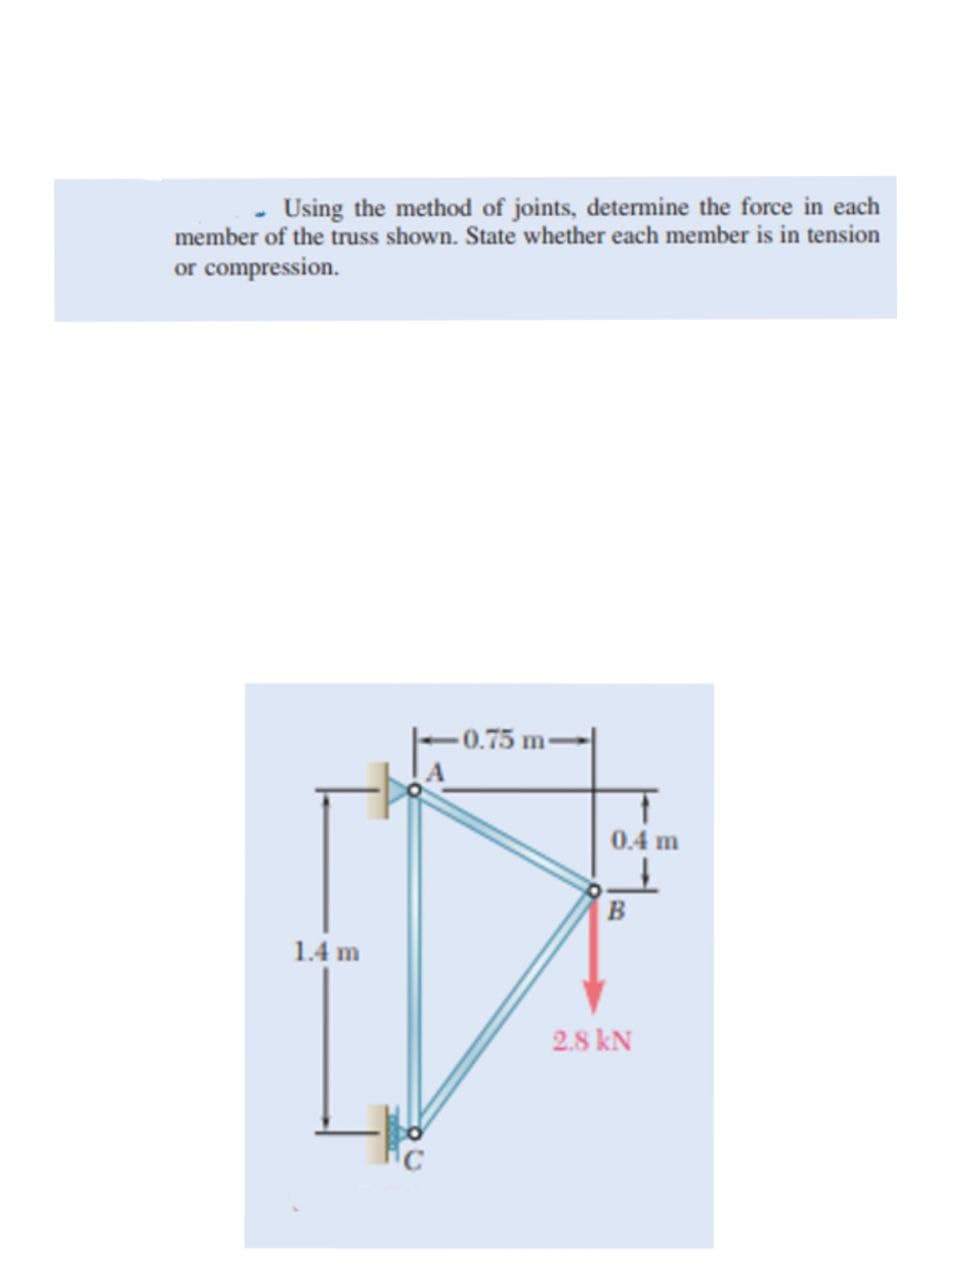 Using the method of joints, determine the force in each
member of the truss shown. State whether each member is in tension
or compression.
1.4 m
-0.75 m-
T
0.4 m
B
2.8 kN